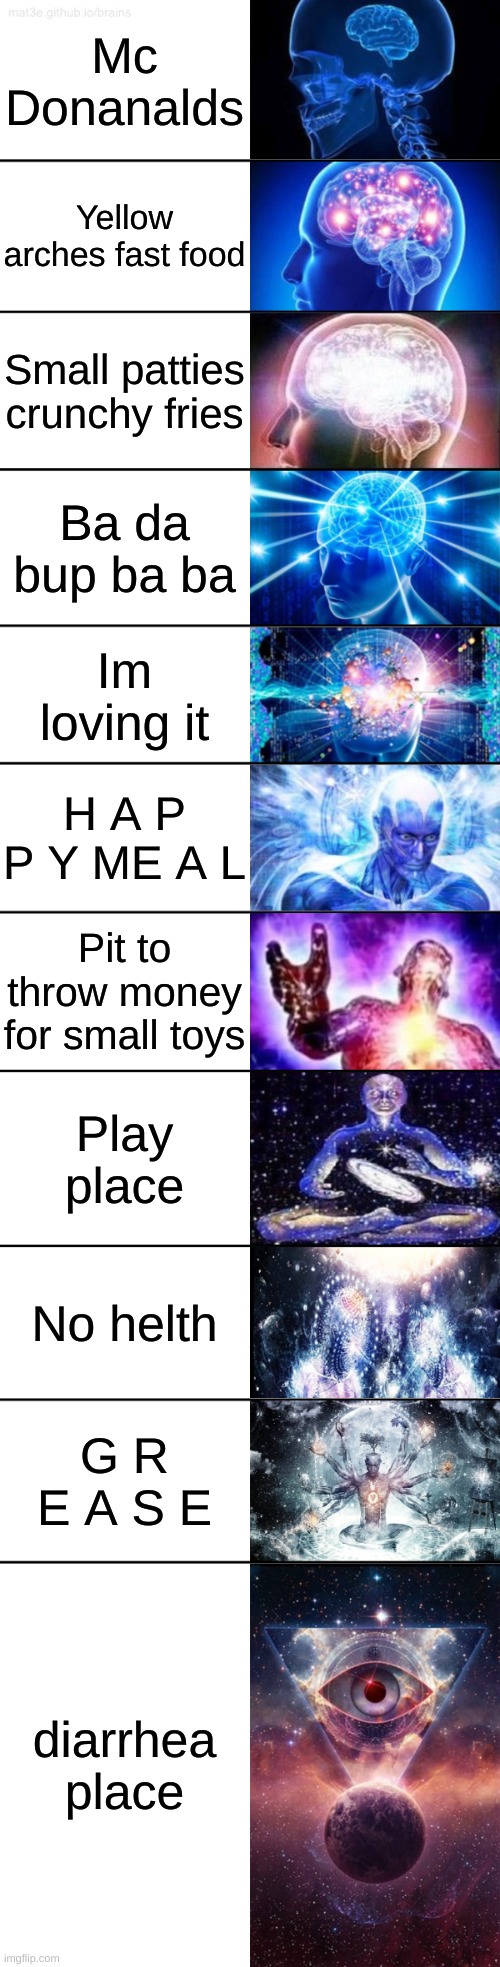 11-Tier Expanding Brain | Mc Donanalds; Yellow arches fast food; Small patties crunchy fries; Ba da bup ba ba; Im loving it; H A P P Y ME A L; Pit to throw money for small toys; Play place; No helth; G R E A S E; diarrhea place | image tagged in 11-tier expanding brain | made w/ Imgflip meme maker